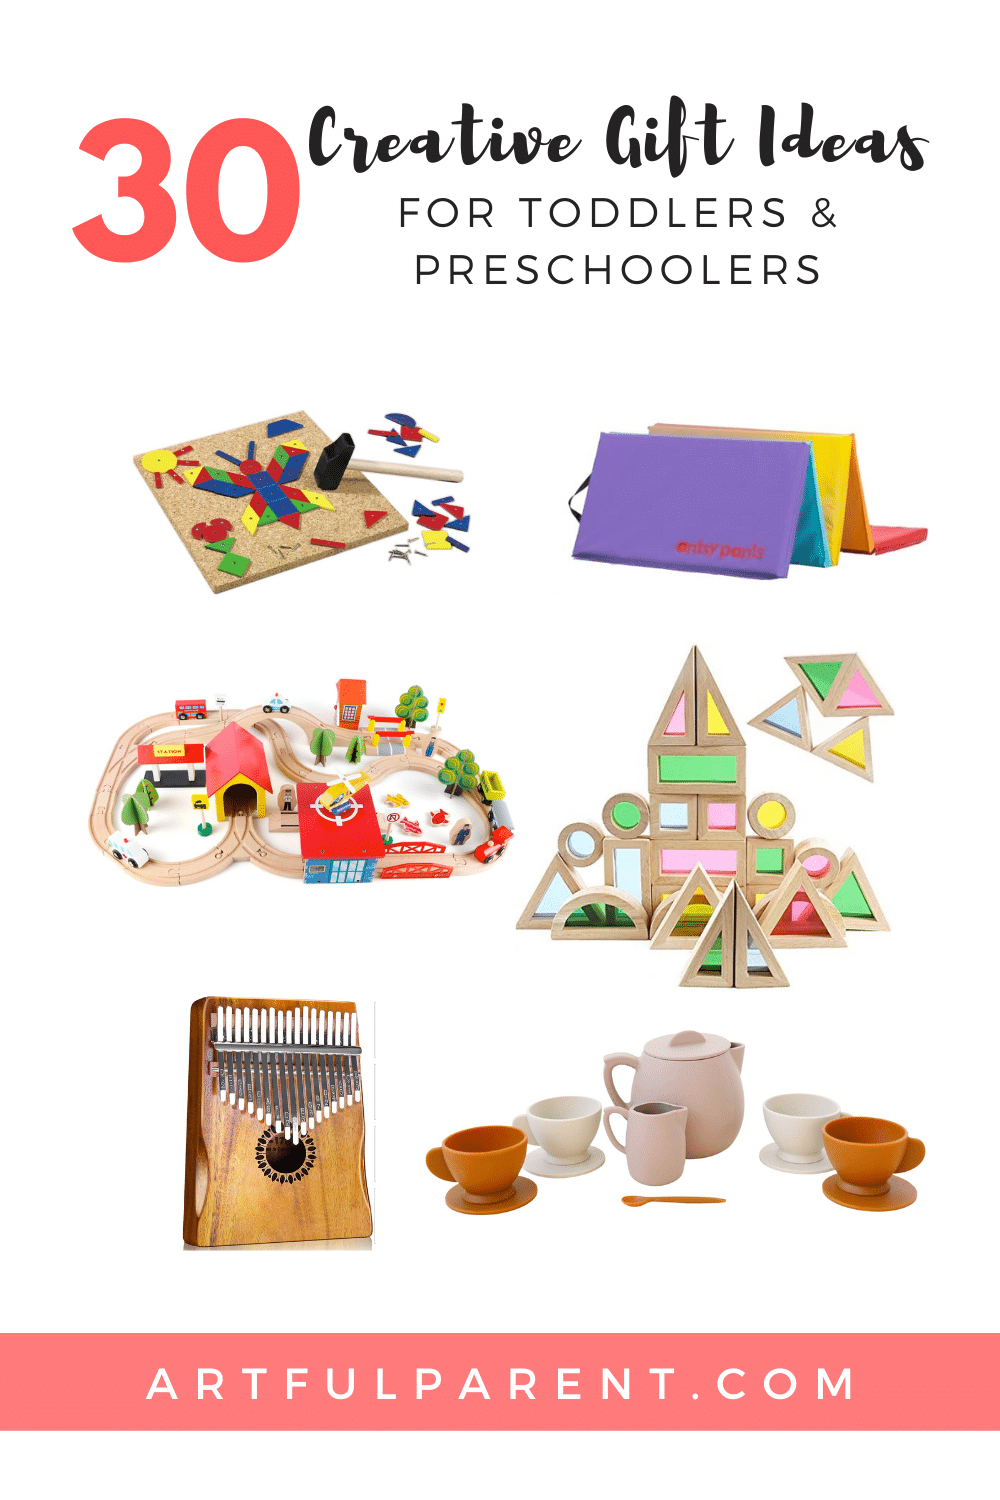 Creative Gift Ideas for Toddlers & Preschoolers